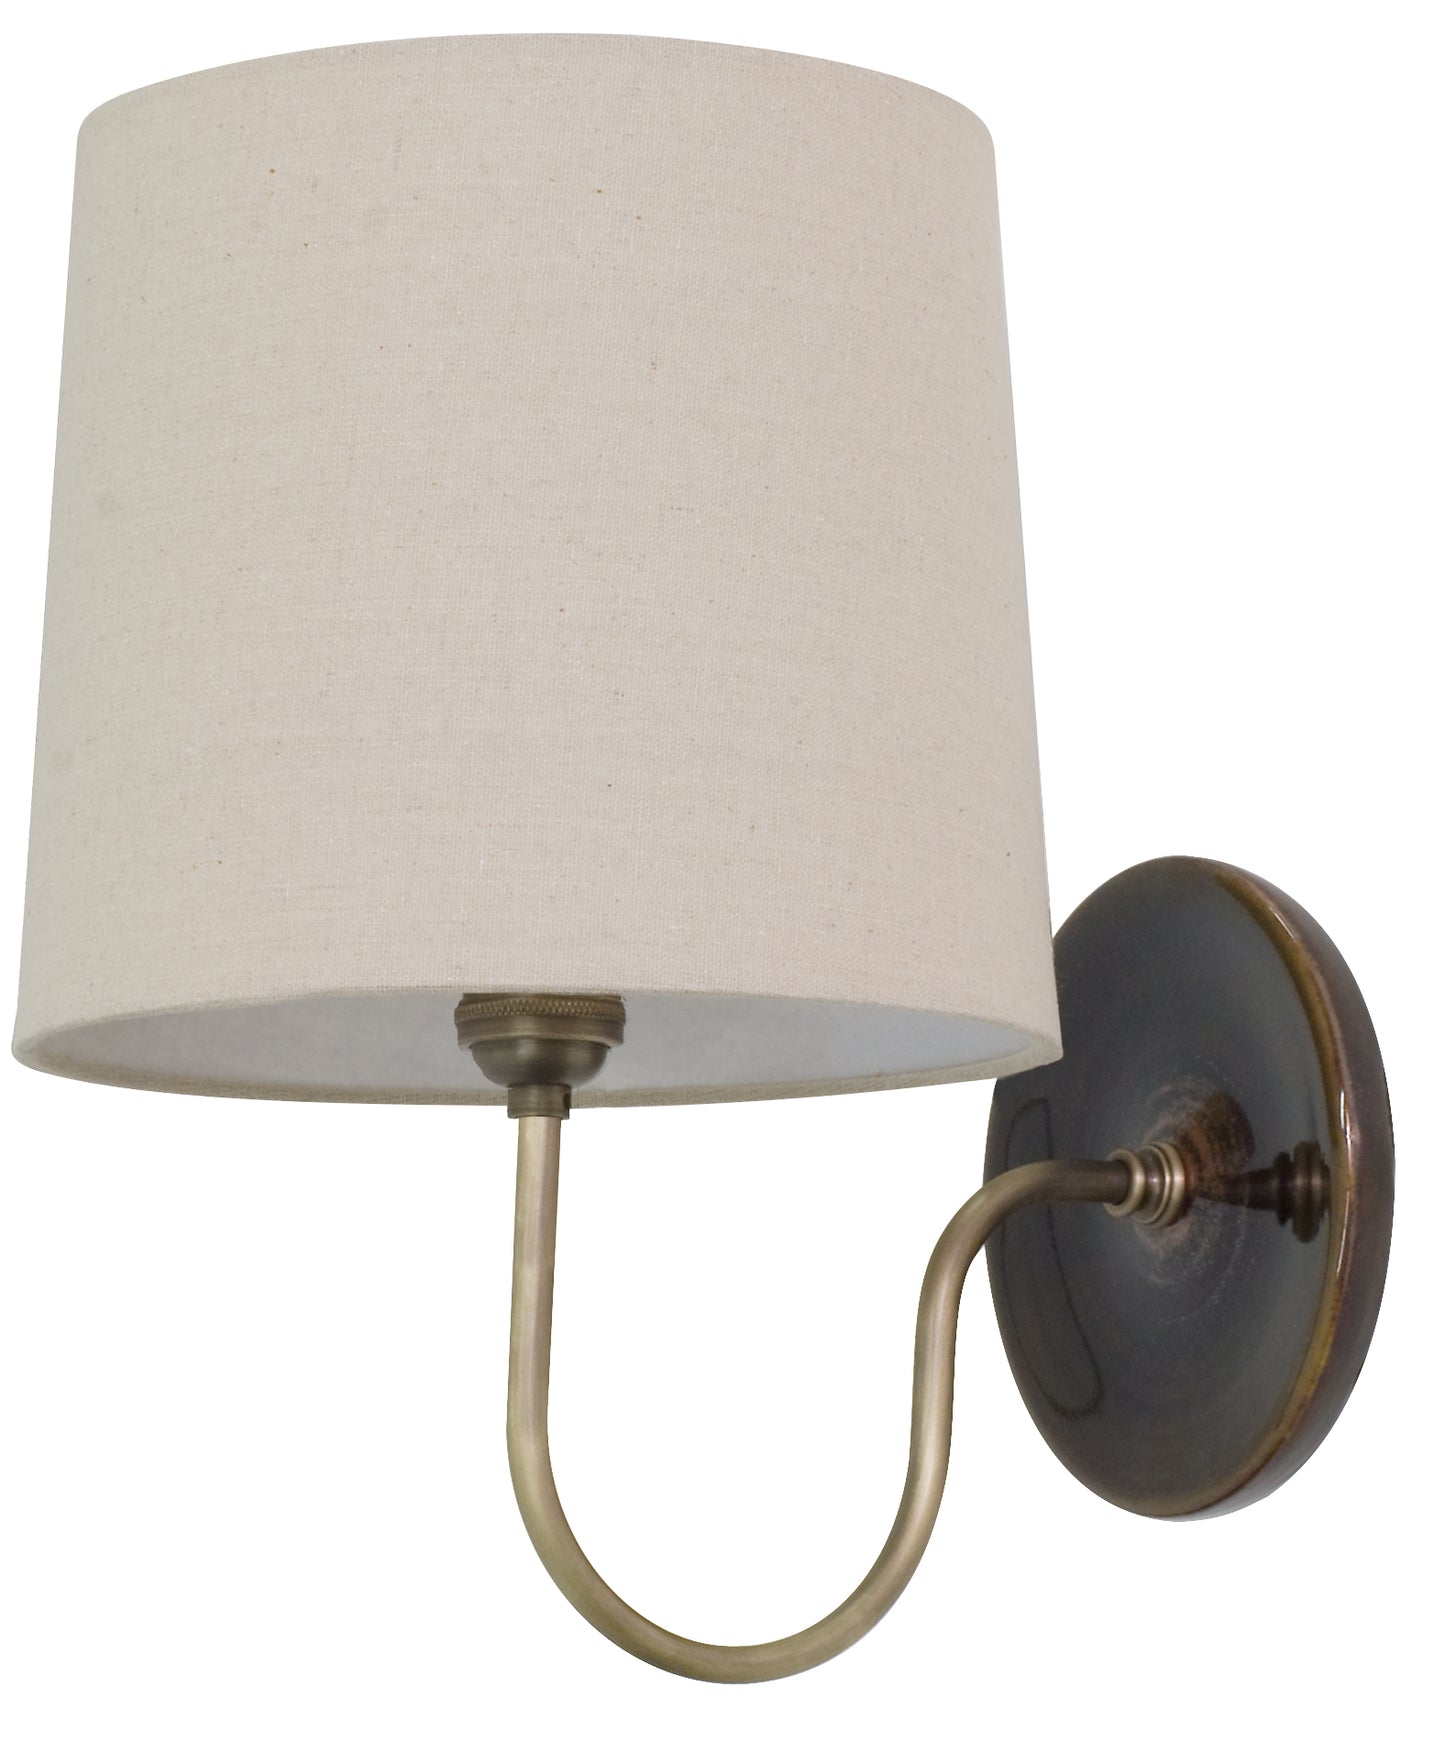 House of Troy Scatchard Wall Lamp in Brown Gloss GS725-BR